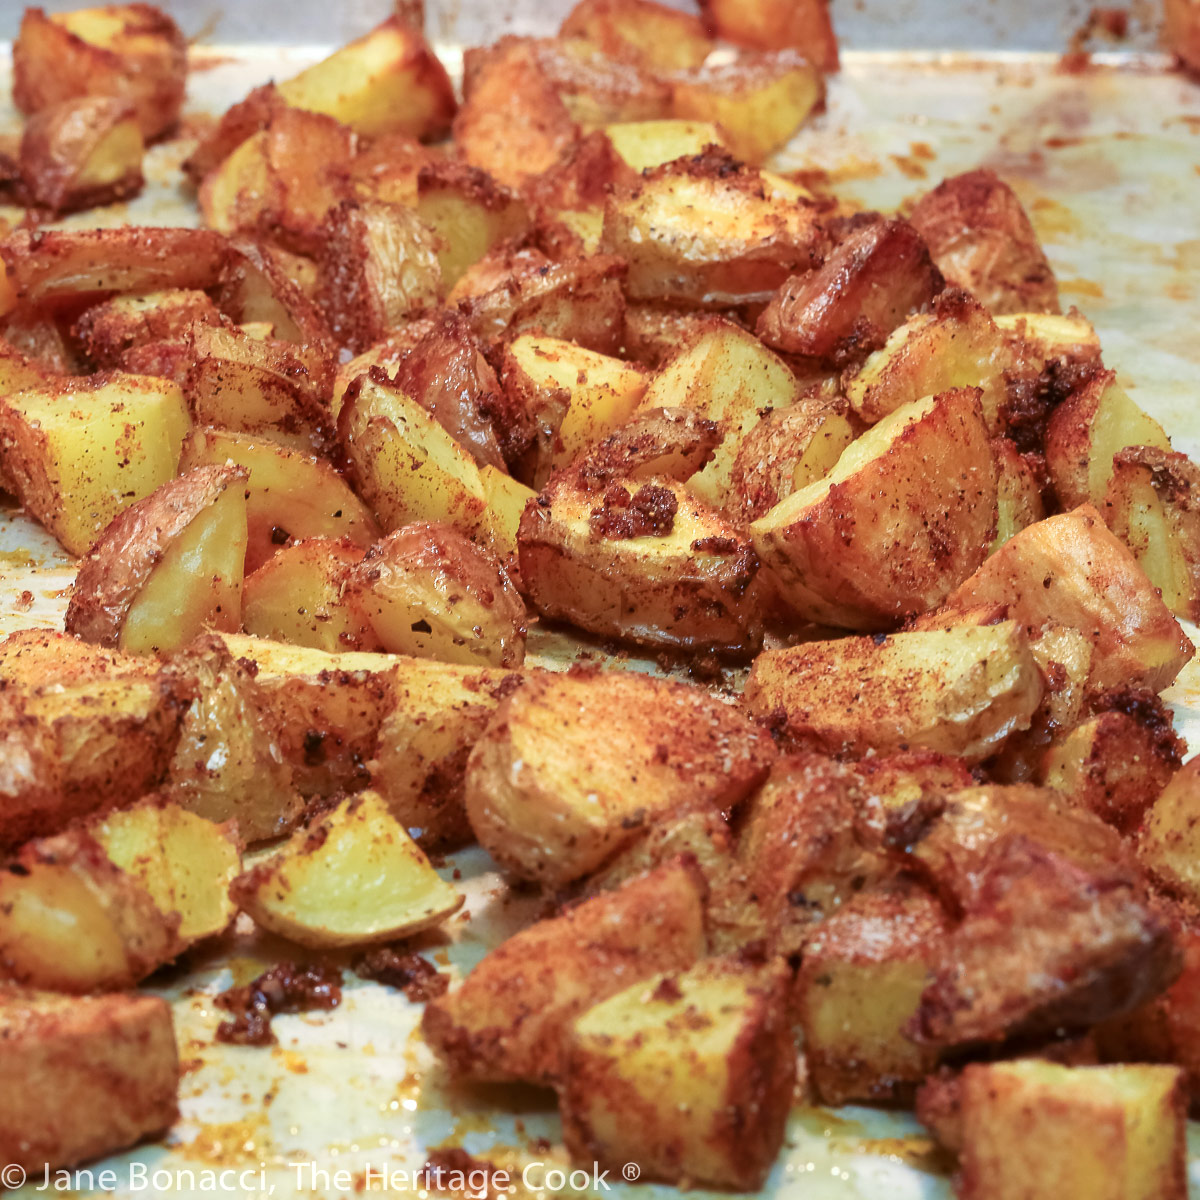 oven-roasted cubed potatoes on a baking sheet